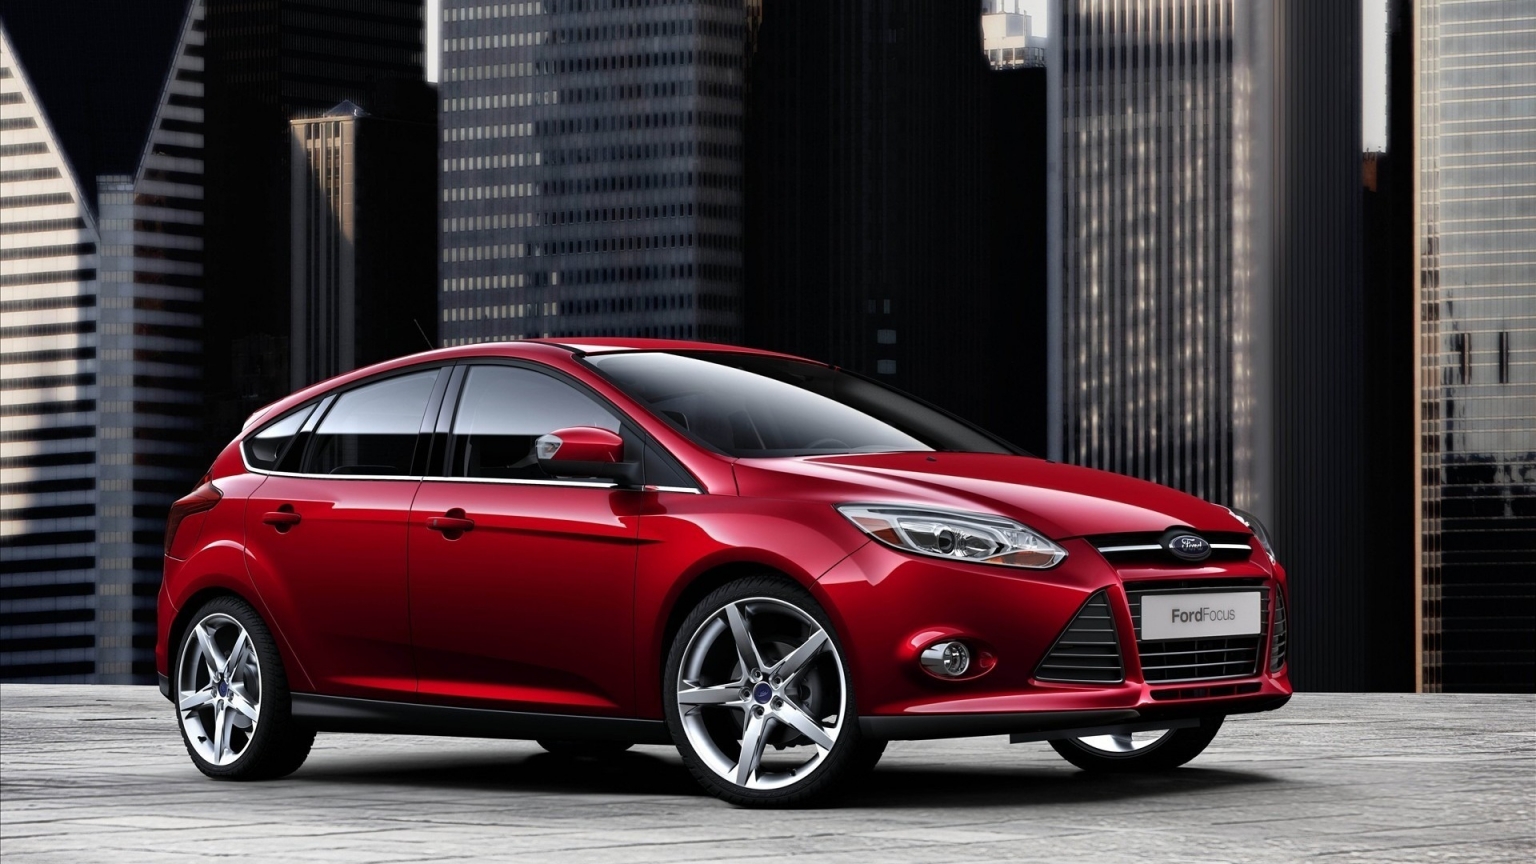 New Ford Focus 2011 for 1536 x 864 HDTV resolution